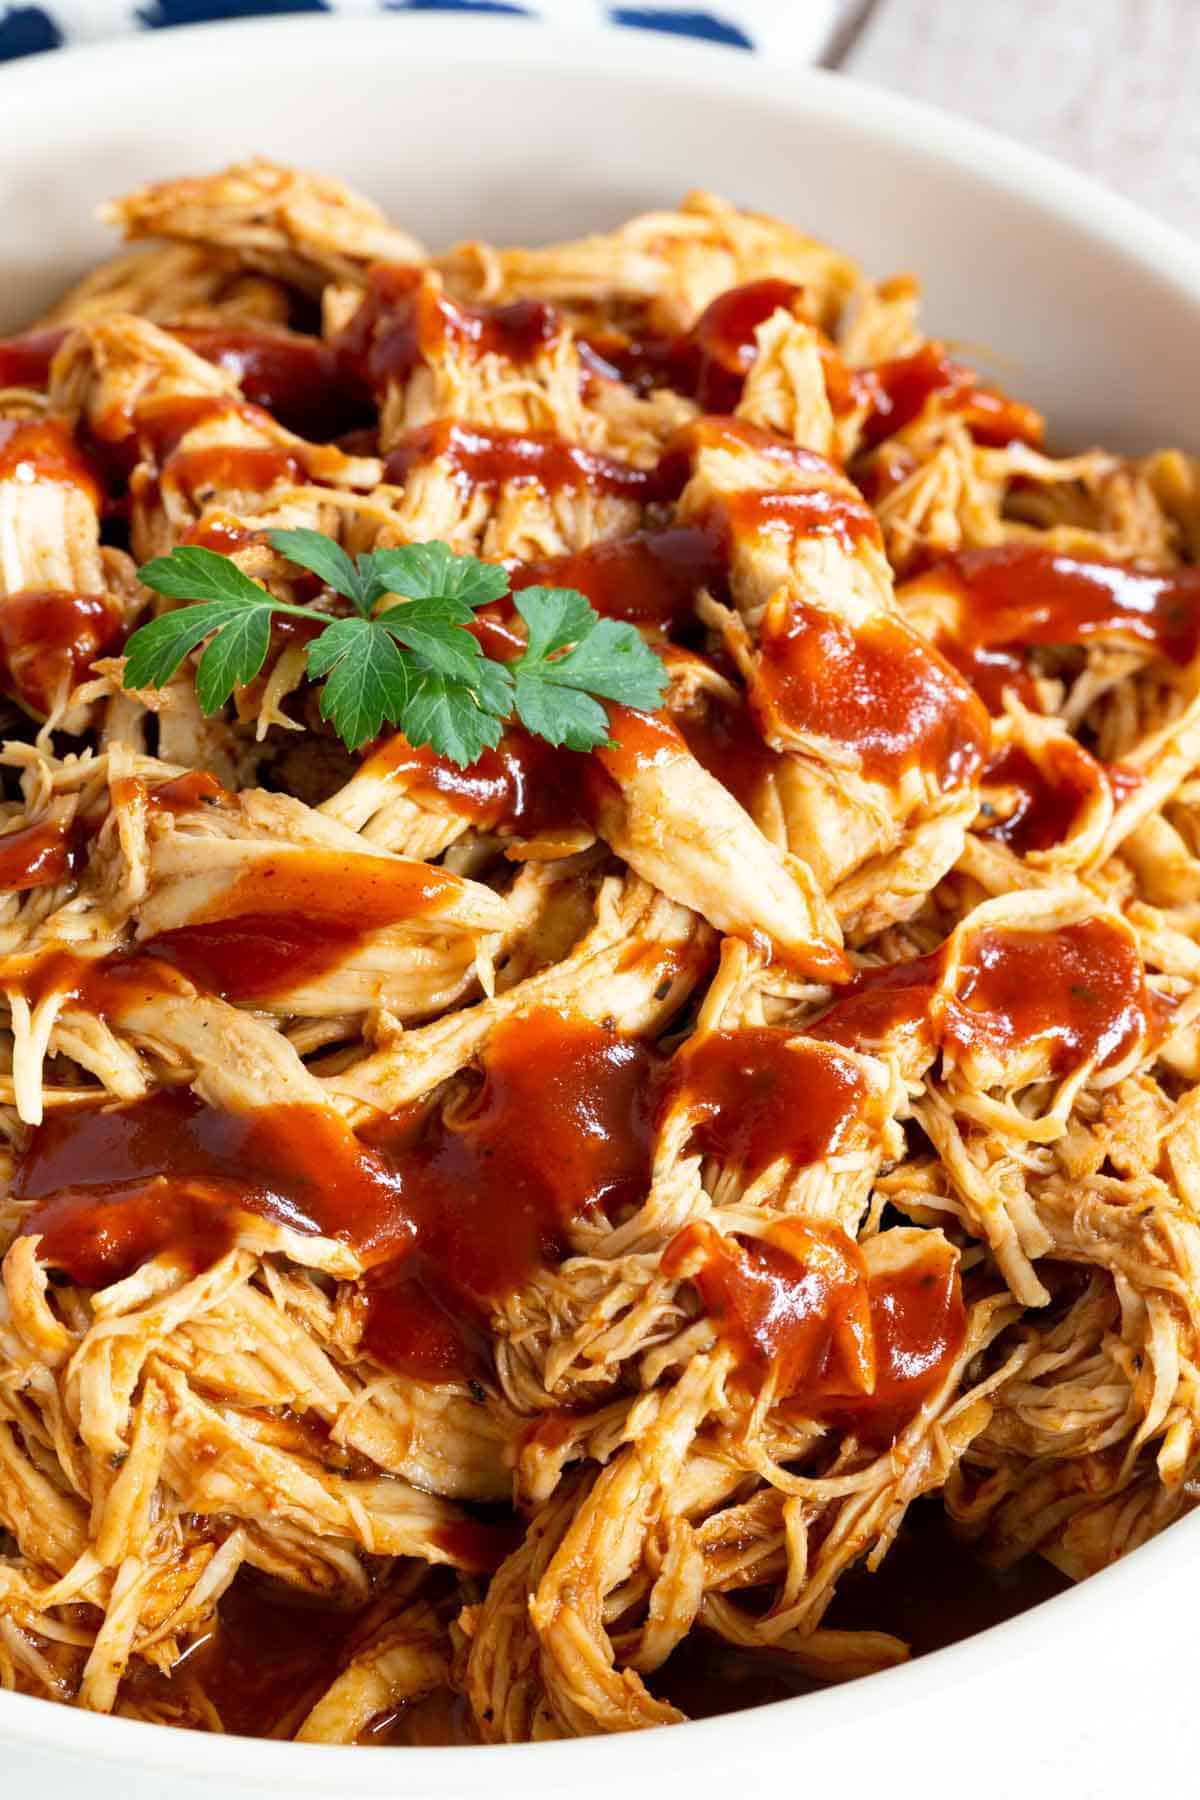 A bowl full of saucy BBQ pulled chicken.